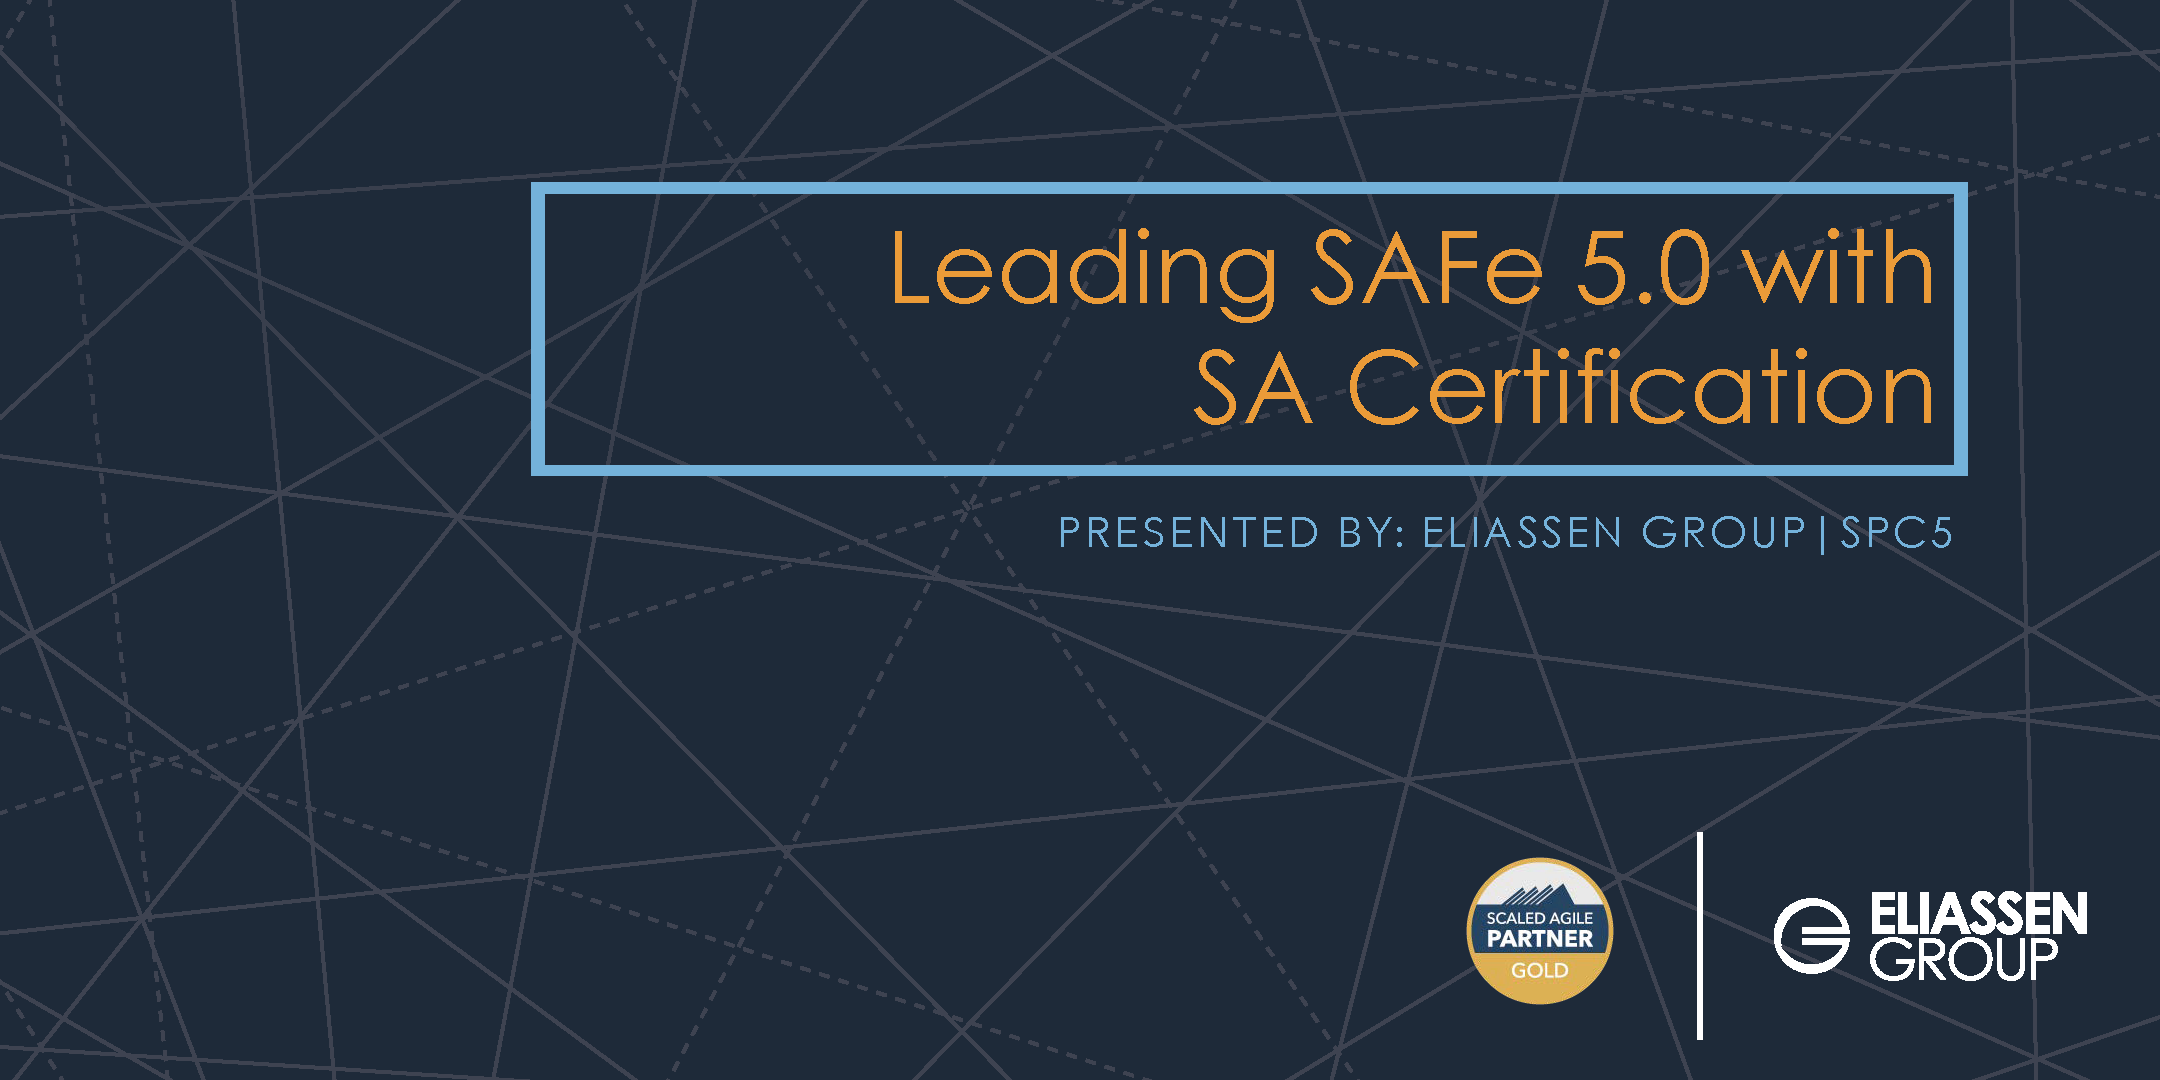 REMOTE DELIVERY - Leading SAFe 5.0 with SA Certification - August